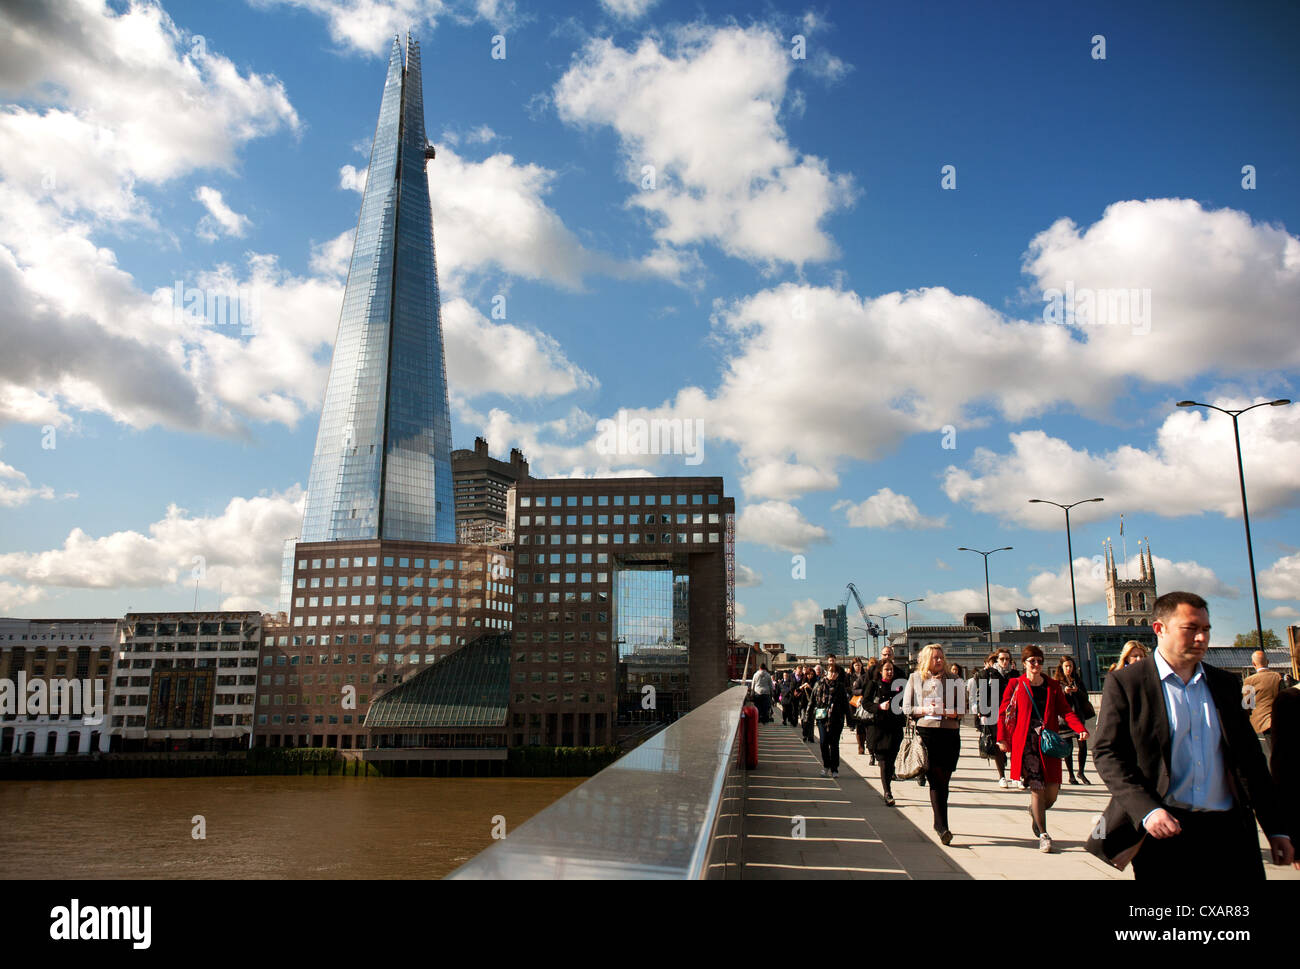 View Of London Bridge Showing The Shard In Background London